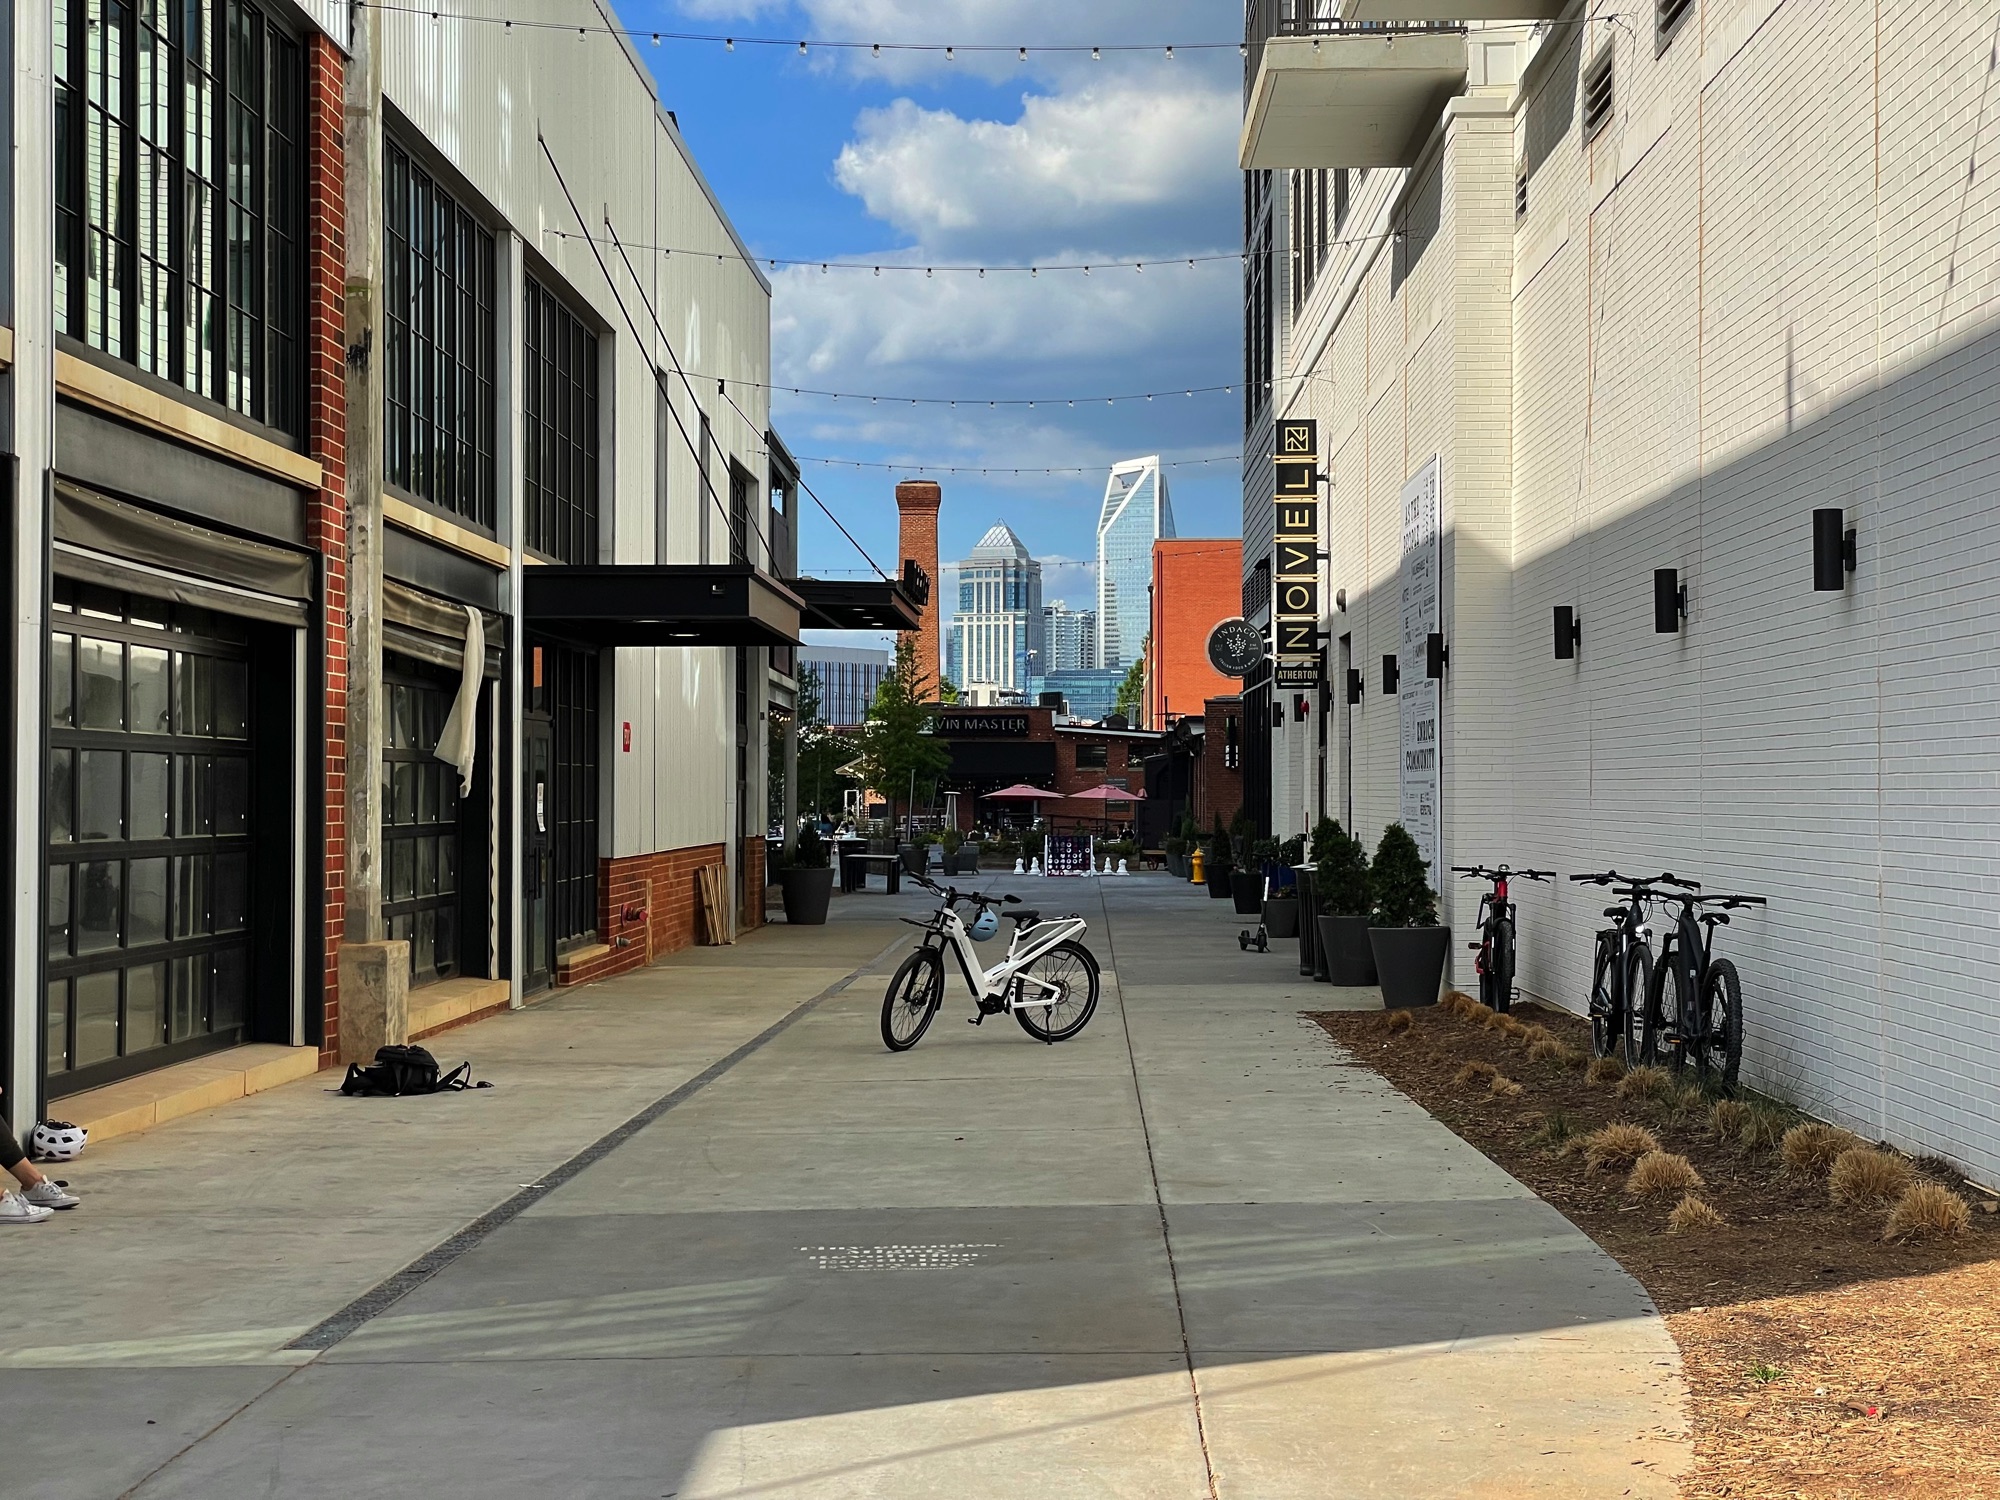 eBikes in Charlotte NC, Electric Pedal Assist Bicycles